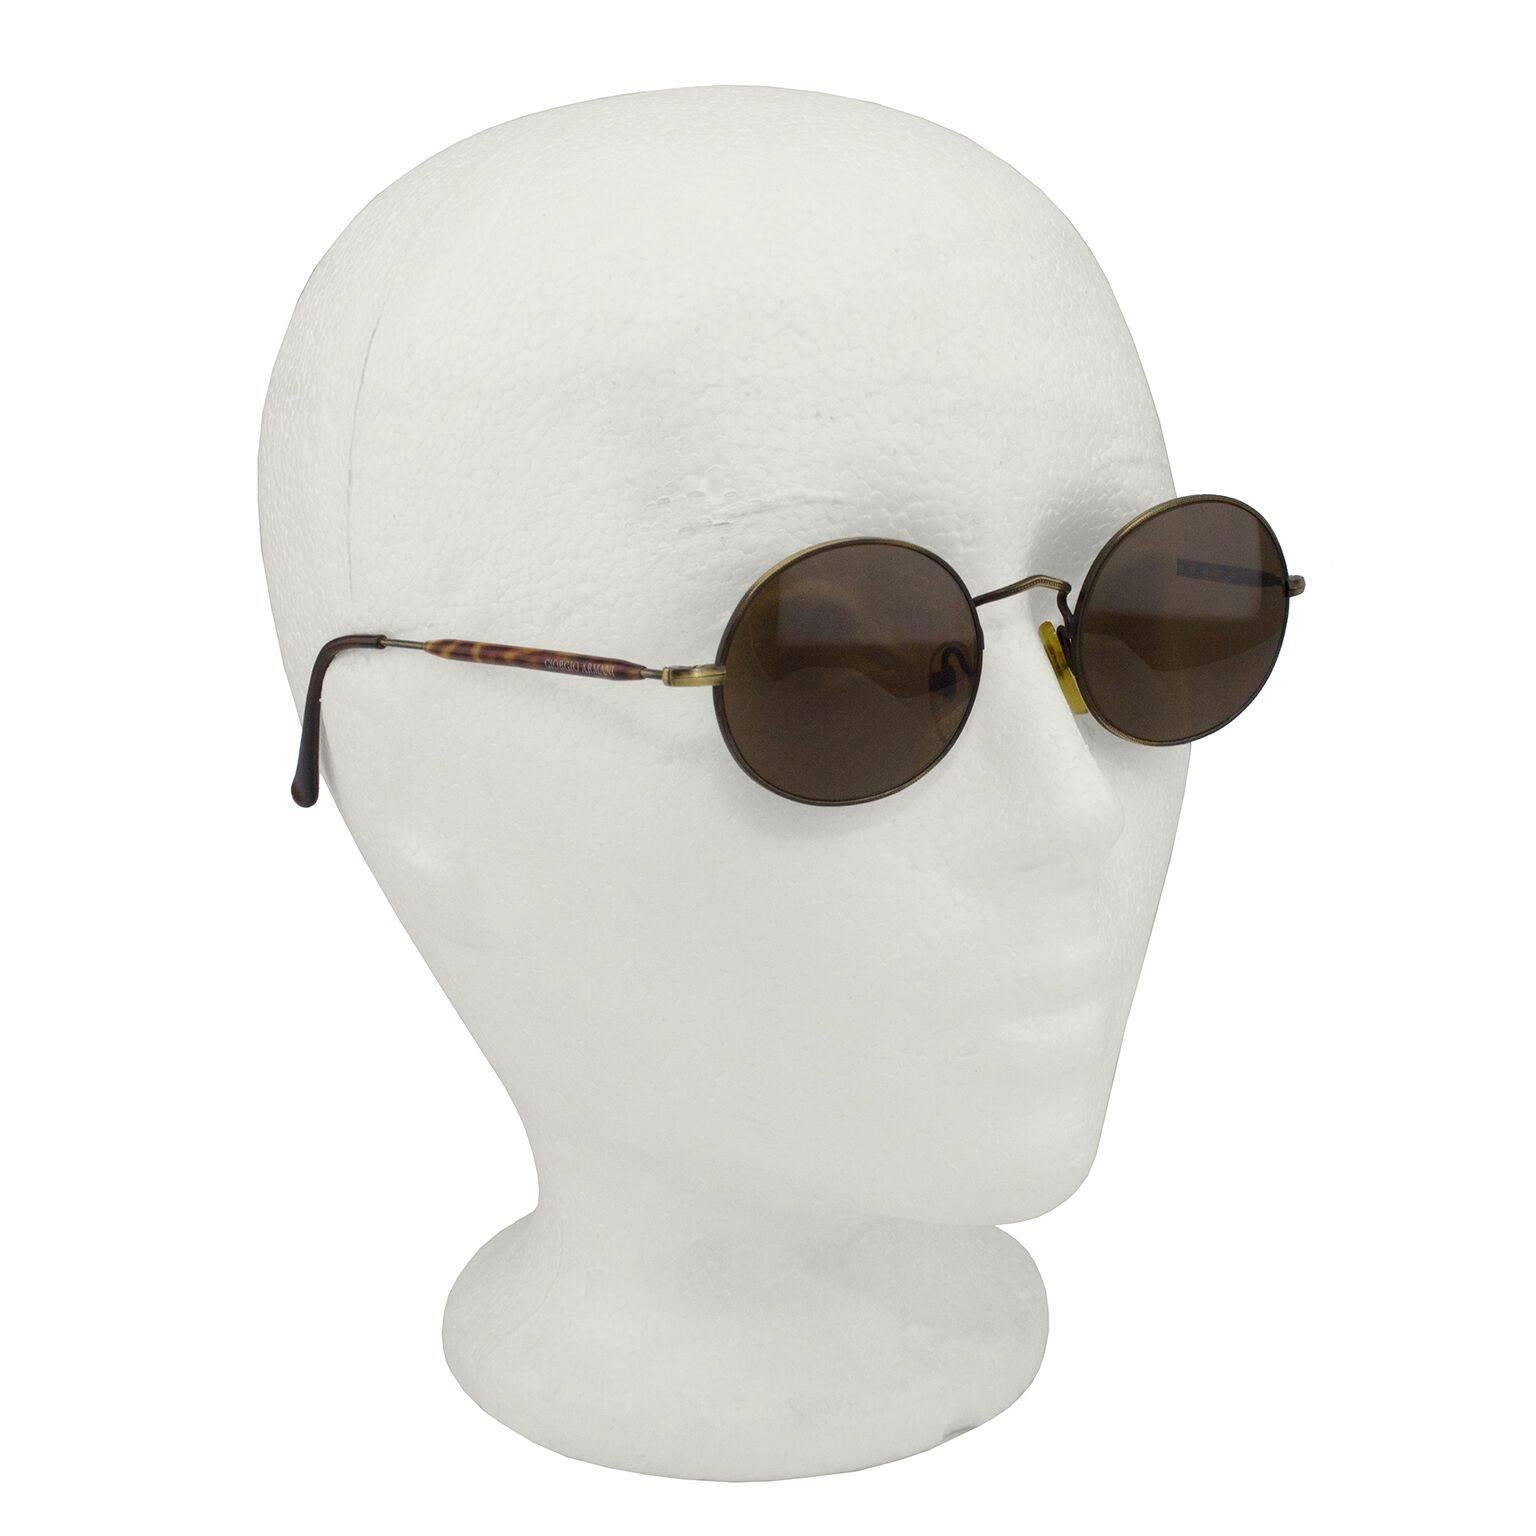 Giorgio Armani brown round sunglasses from the early 1990s. Golden brown wire frames with brown lenses and a small GA logo stamped on outer corner of each lens. Tortoise shell detail on the arms with branding stamped on inside of arms. Very on trend